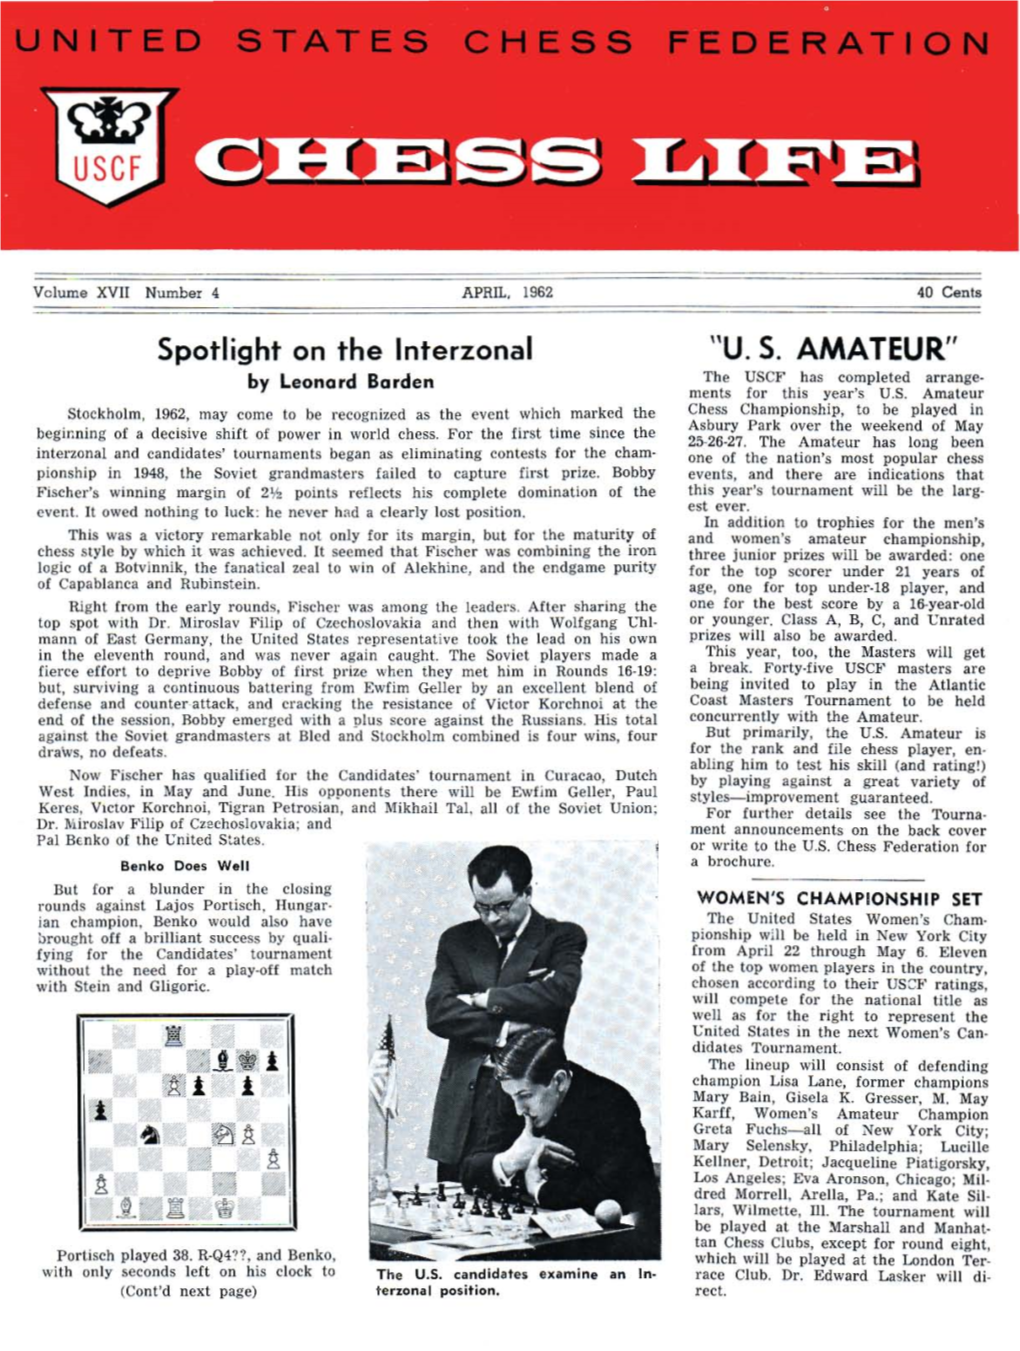 Tournaments Began As Eliminating Contests for the Cham· One of the Nation's Most Popular Chess Pionship in 1948, the Sovict Grandmasters Failcd to Capture First Prizc